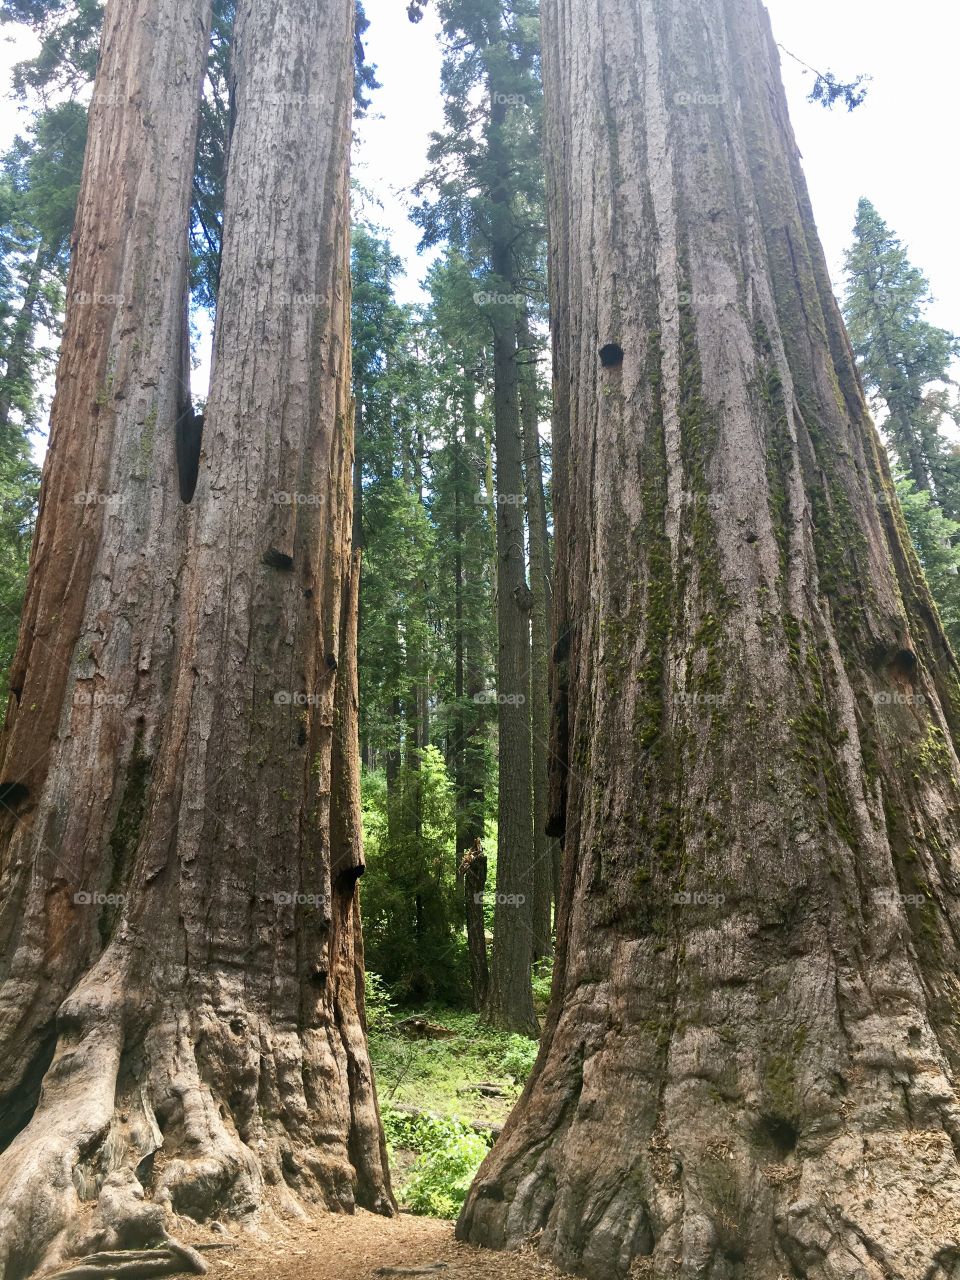 Those are some big trees 